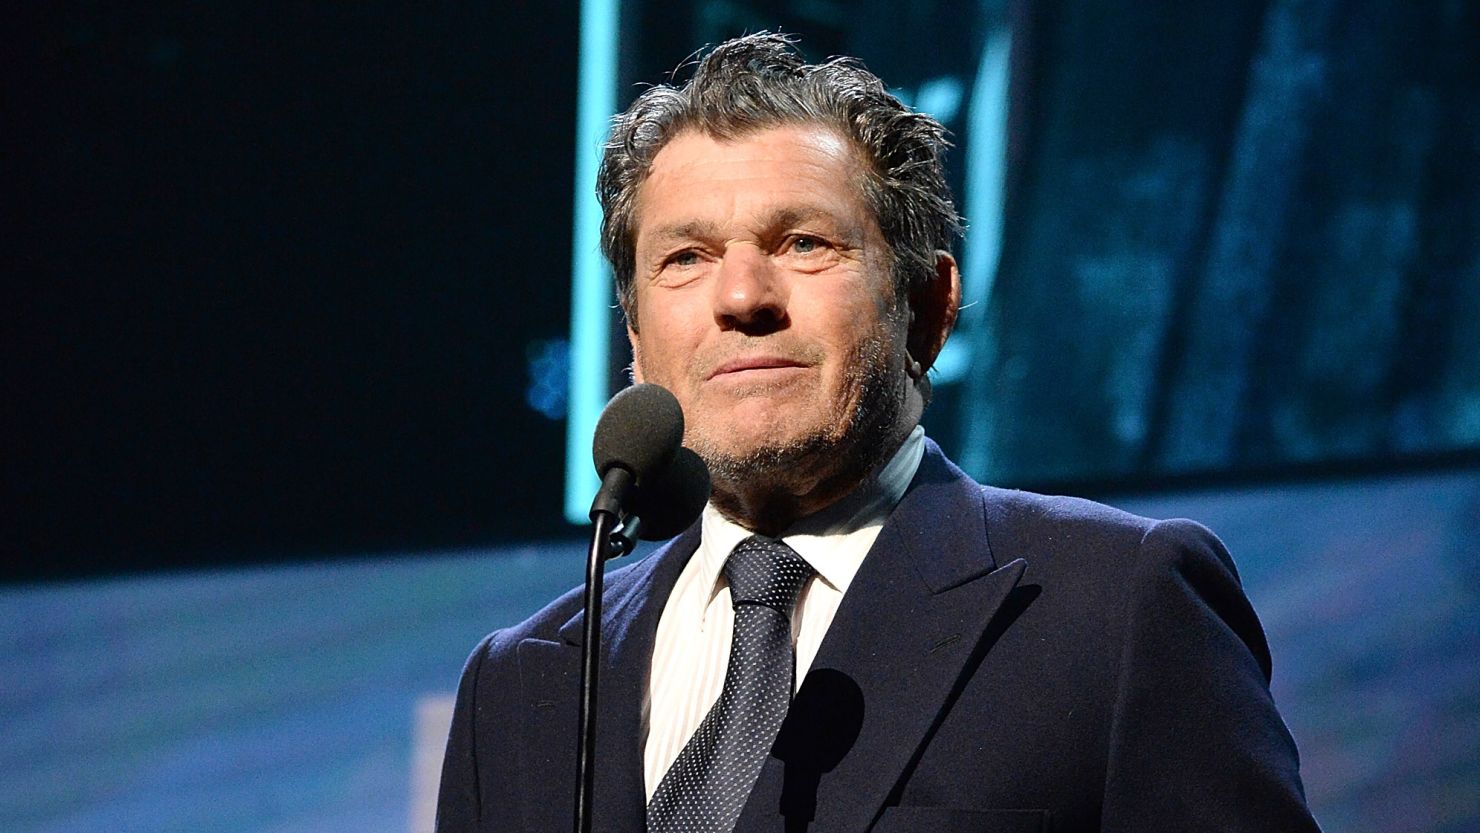 Jann Wenner at the 2017 Rock & Roll Hall Of Fame Induction Ceremony in New York. 